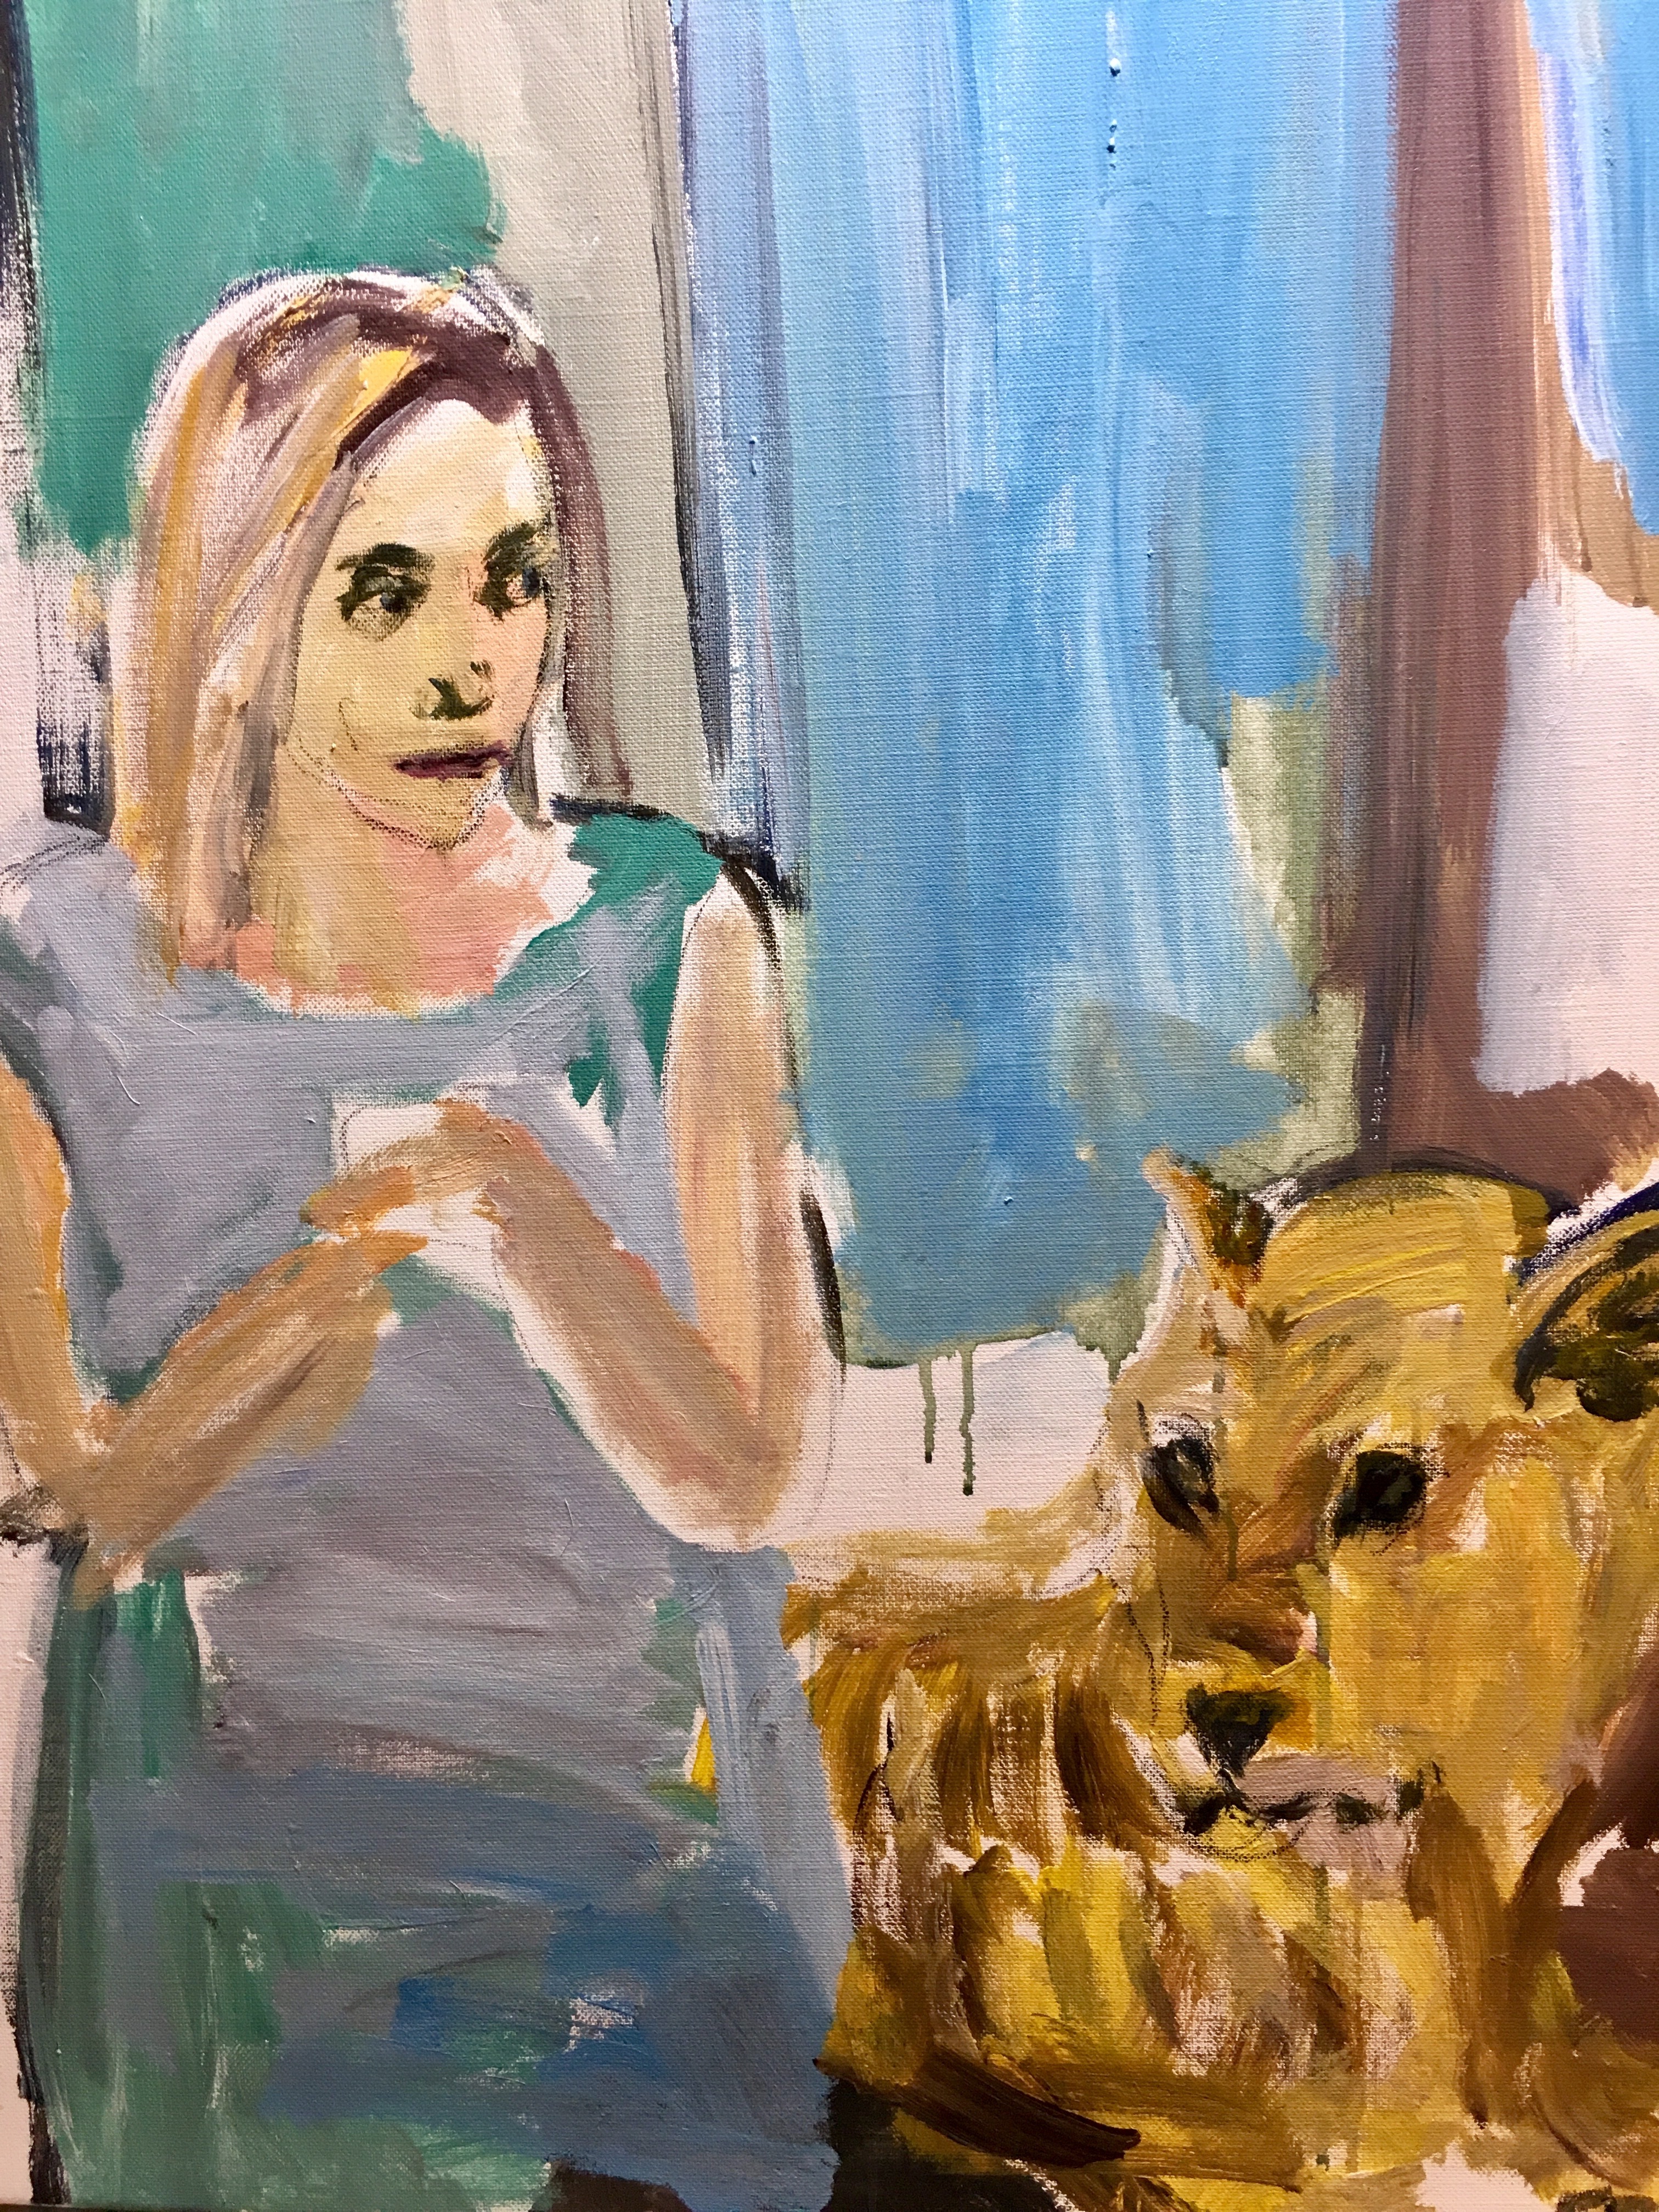 Charlotte with animal, from exposition Cité Universitaire 2018. Acryli